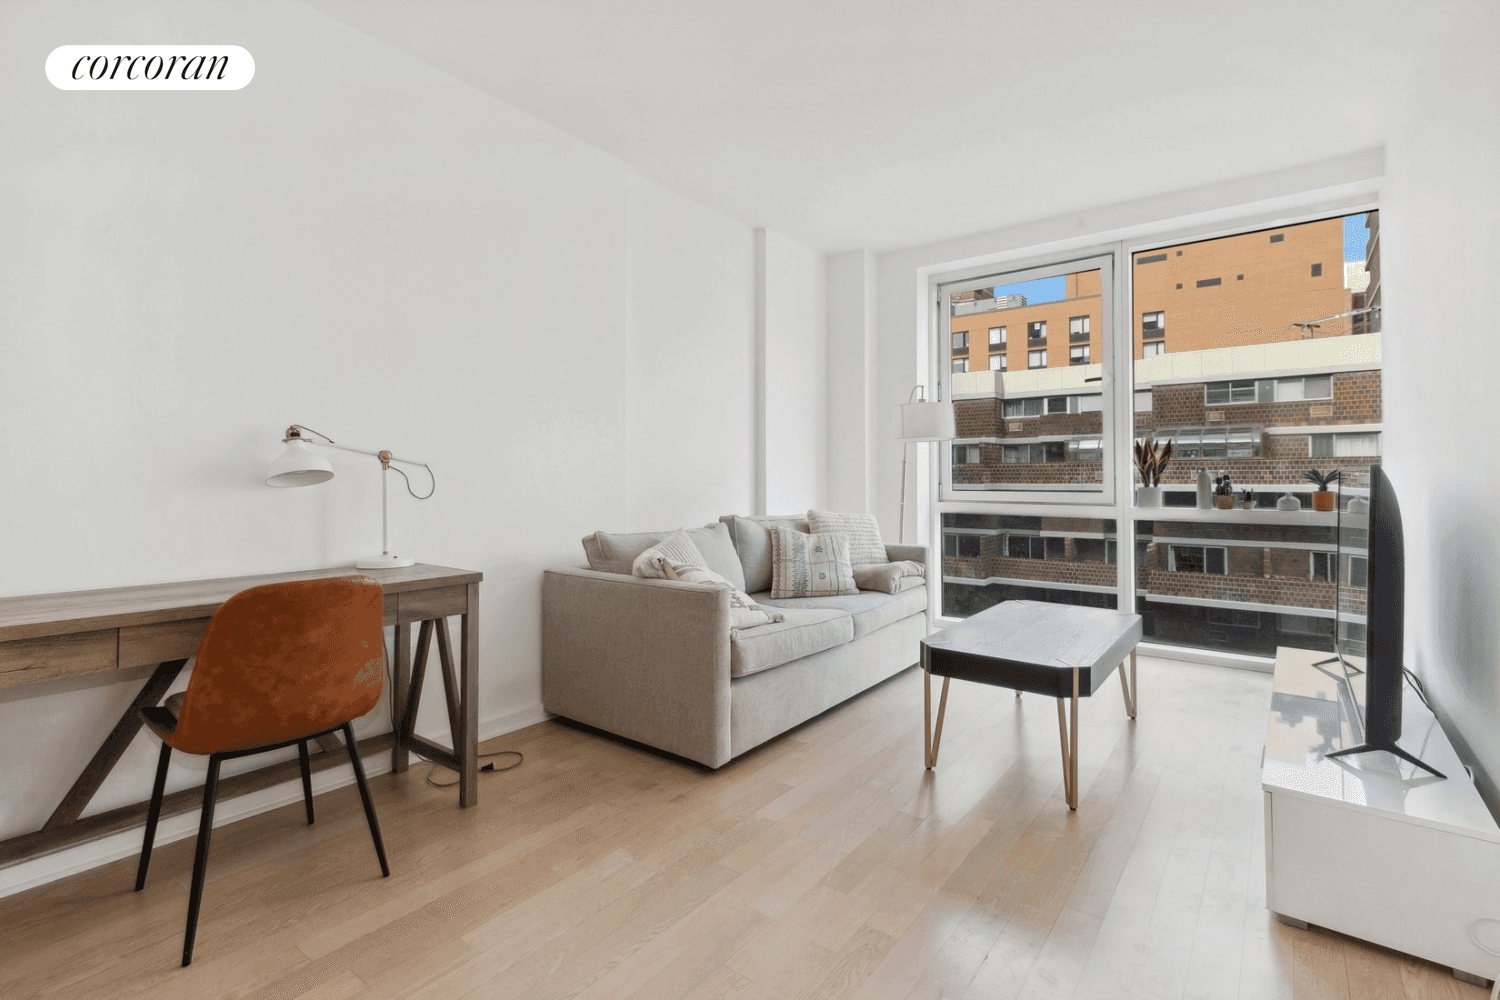 Indulge in urban luxury living with this stunning one bedroom, one bath home boasting breathtaking city views through floor to ceiling windows.